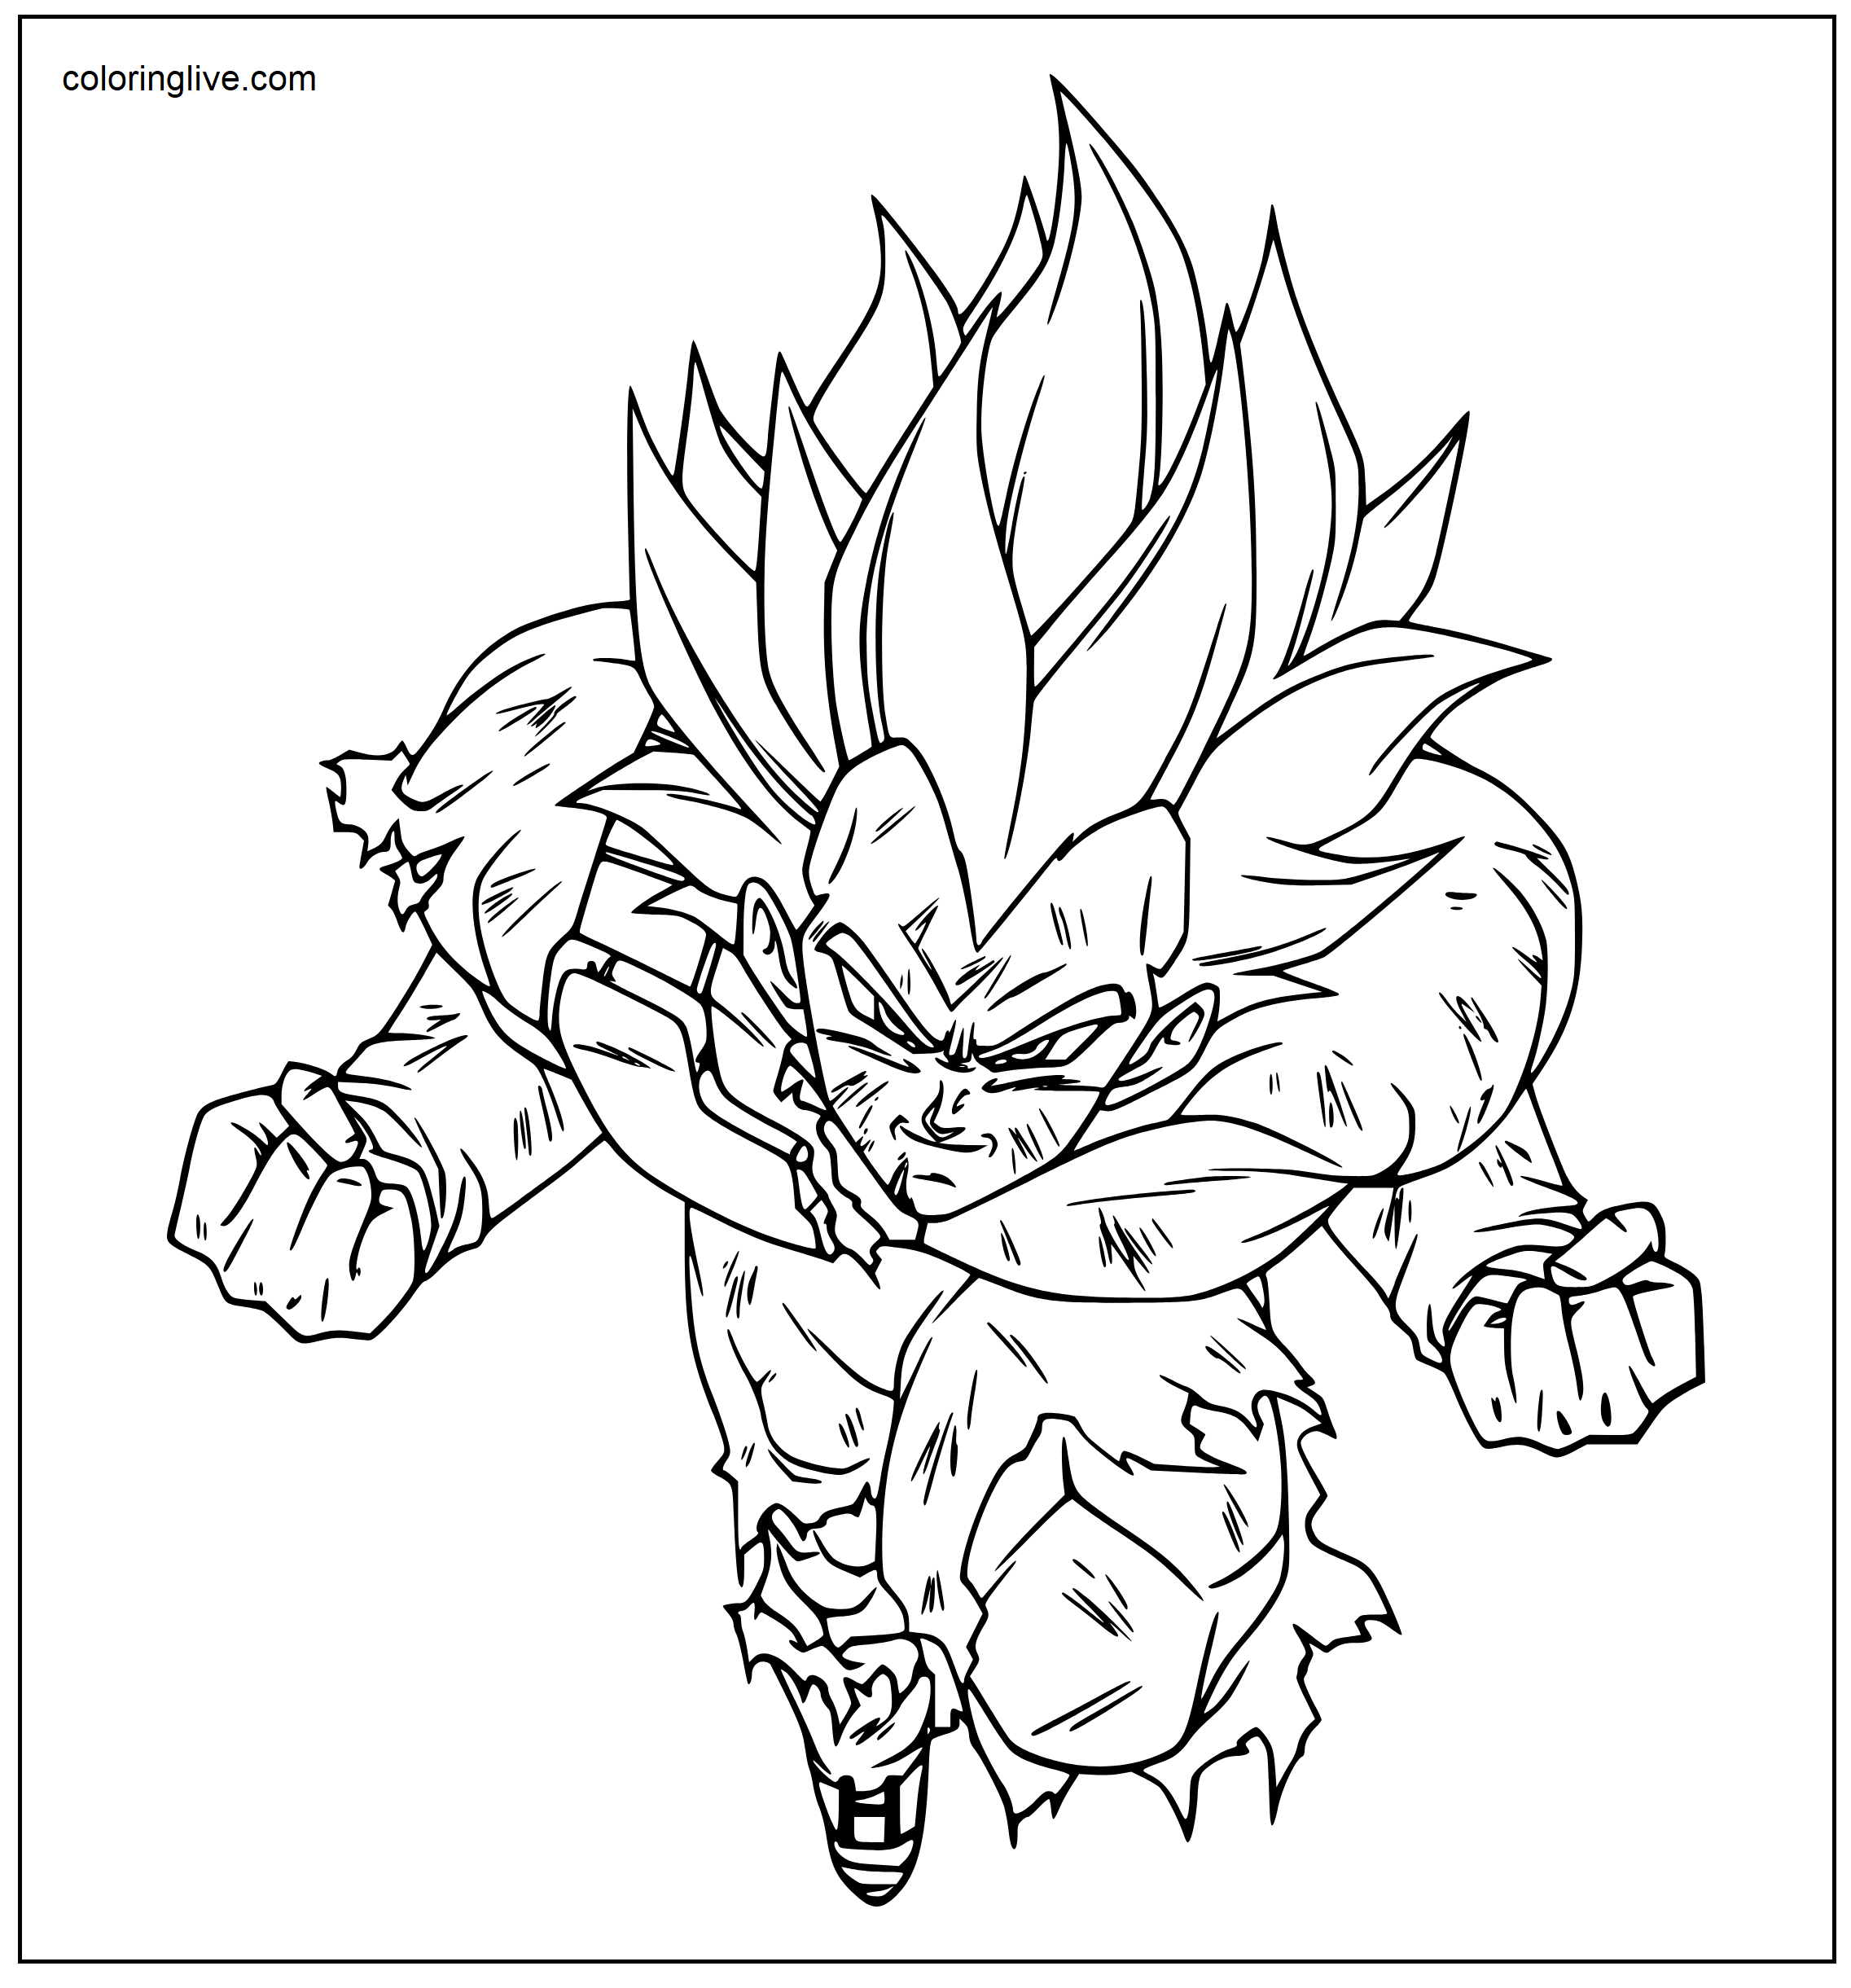 Printable Goku is on the run Coloring Page for kids.